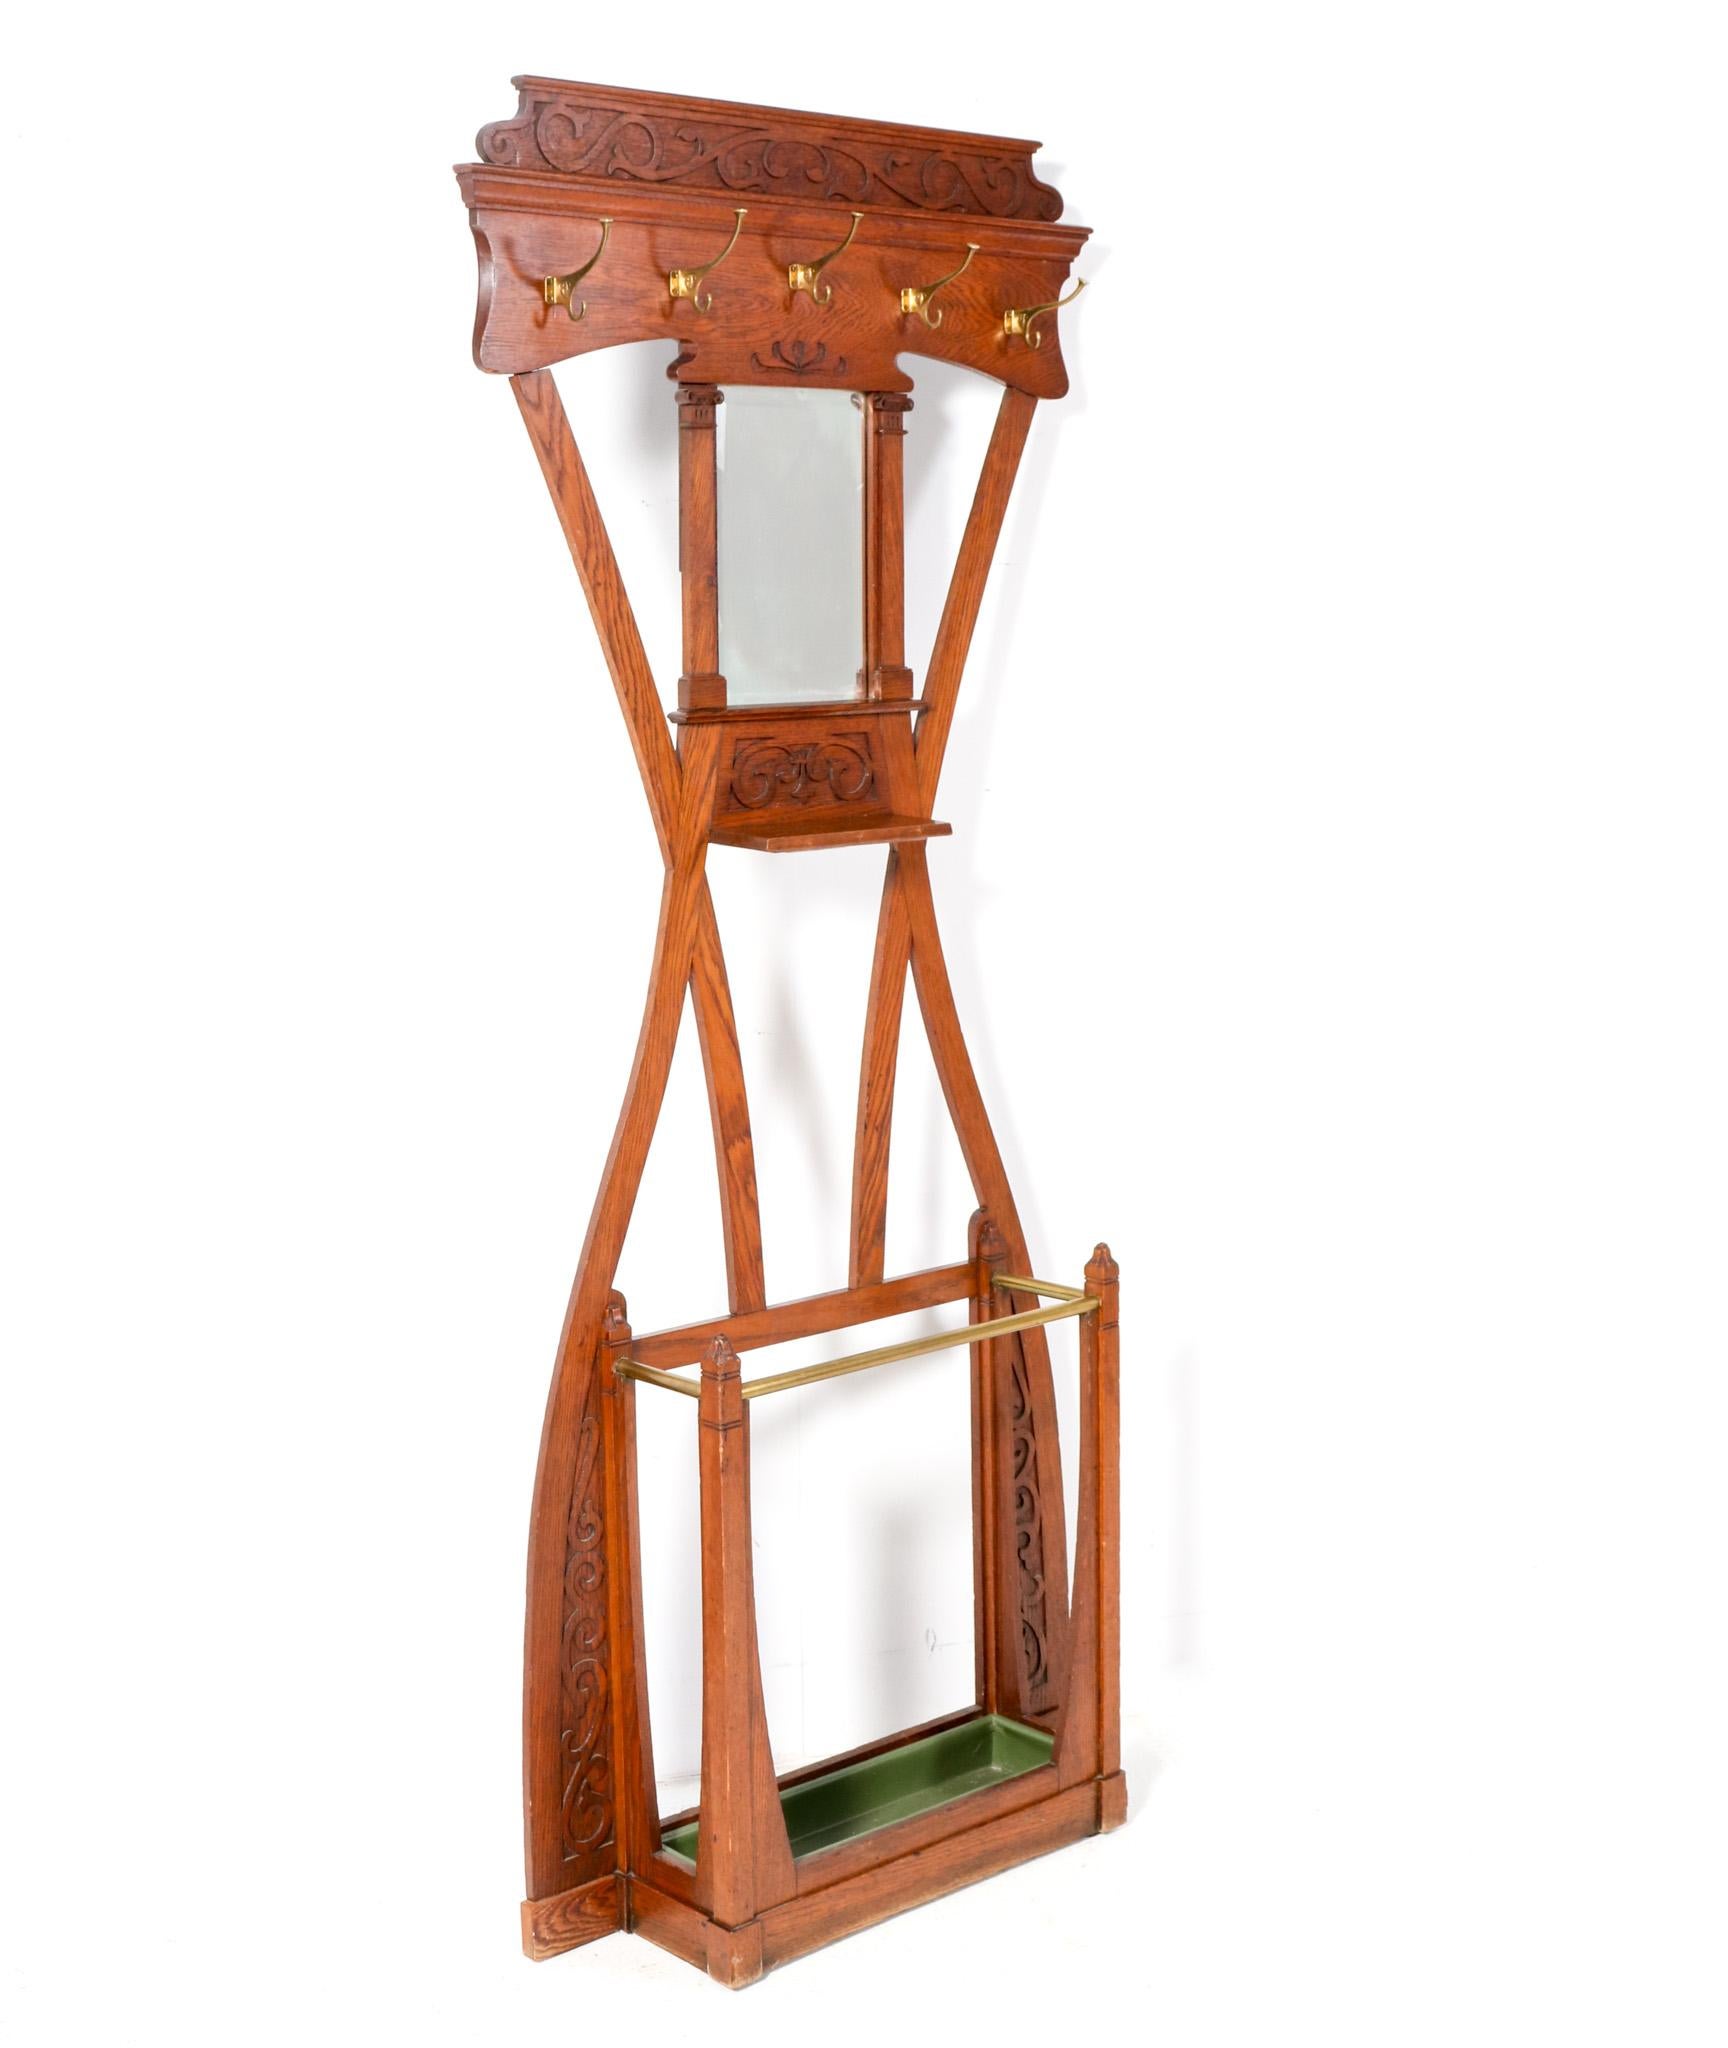 Stunning and rare Art Nouveau Arts & Crafts hall tree or porte manteau.
Striking Dutch design from the 1900s.
Solid oak frame with five original patinated brass hooks and integrated umbrella stand.
Original beveled mirror and hard-carved